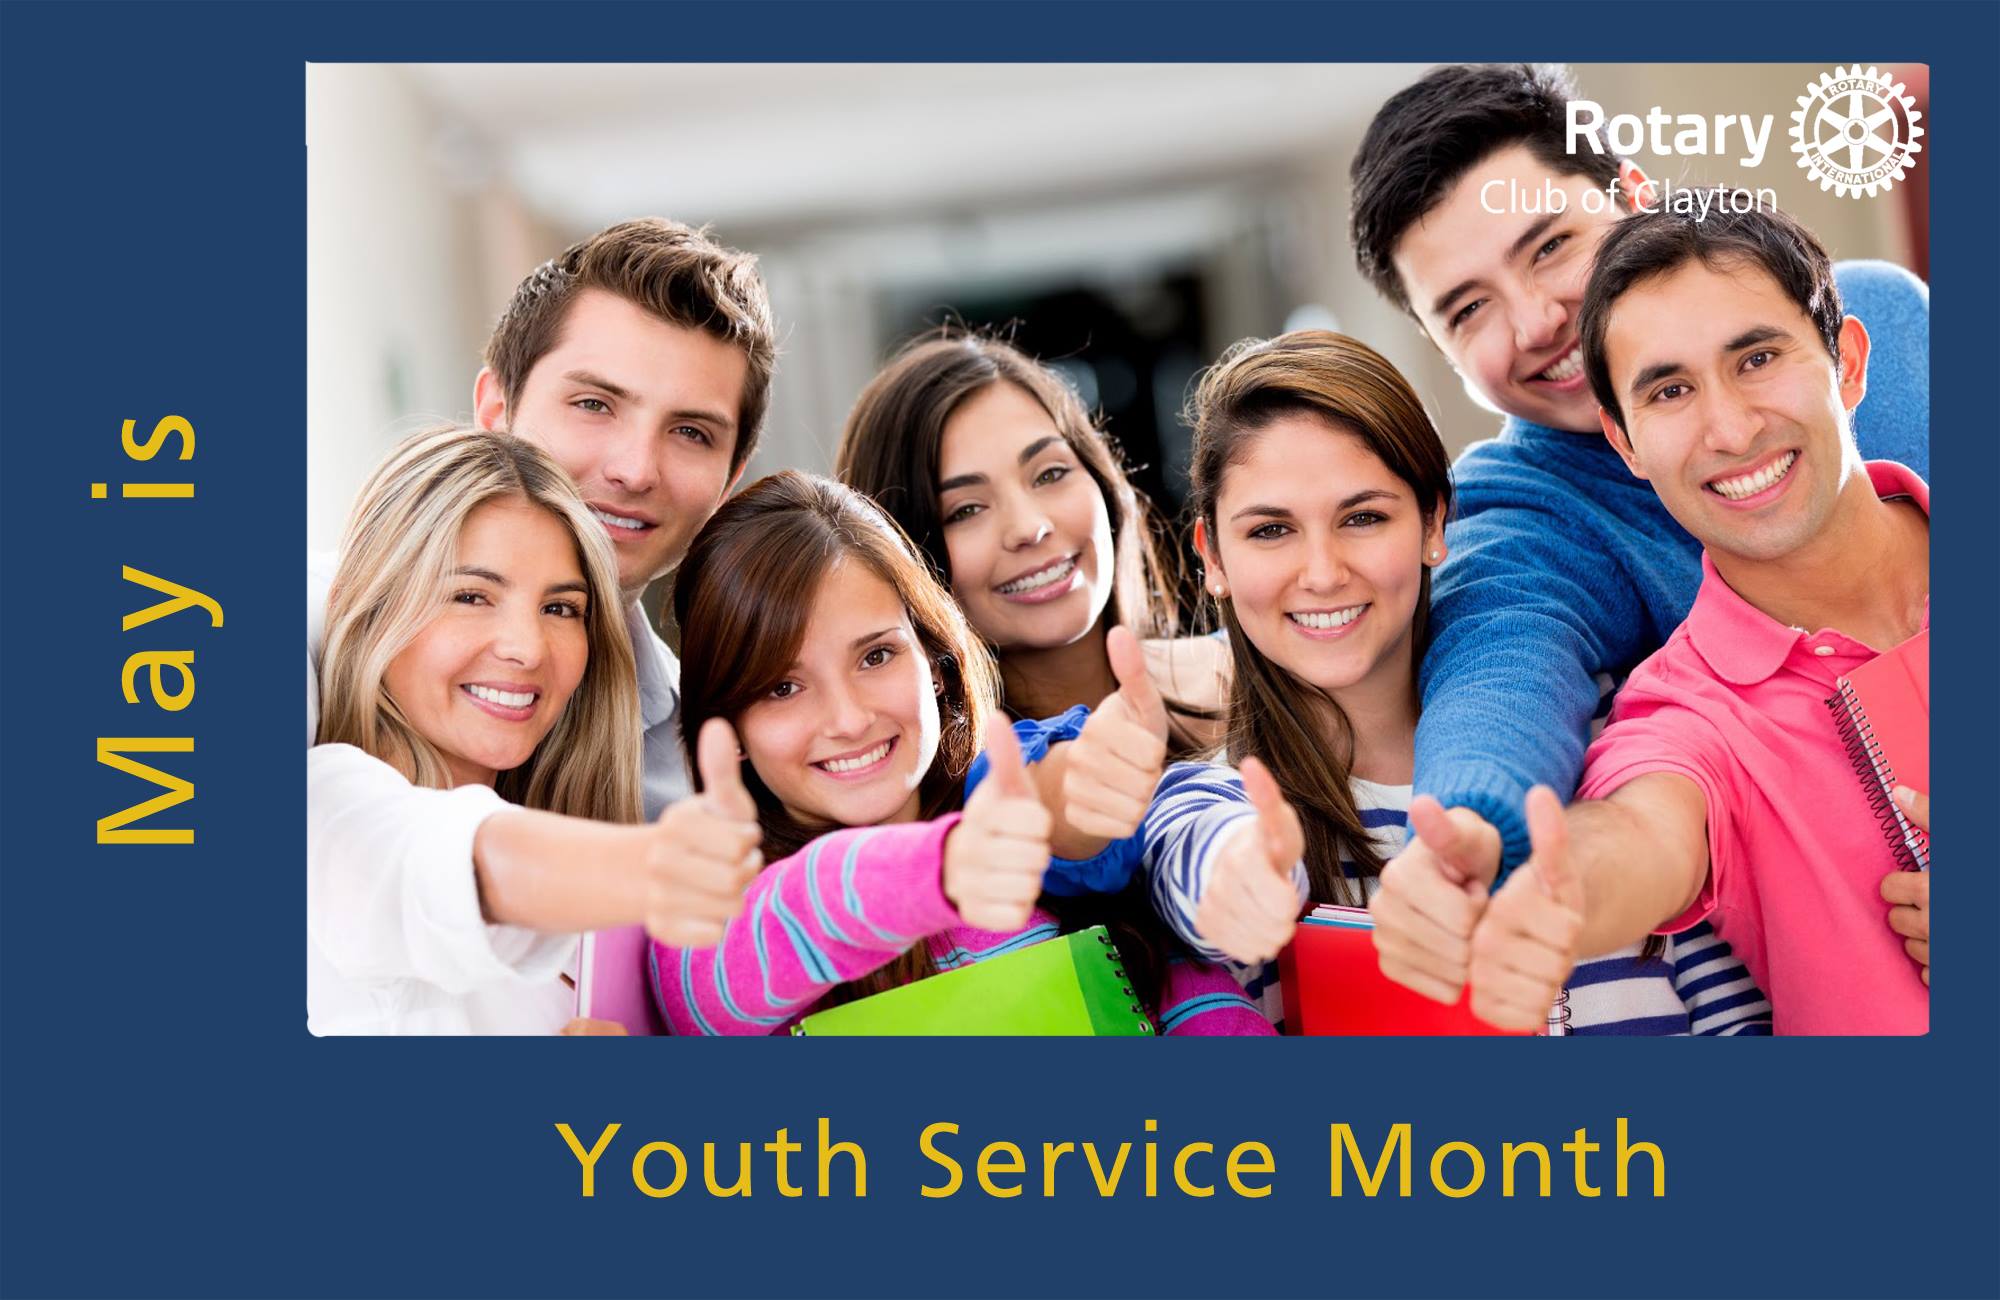 May is Youth Service Month